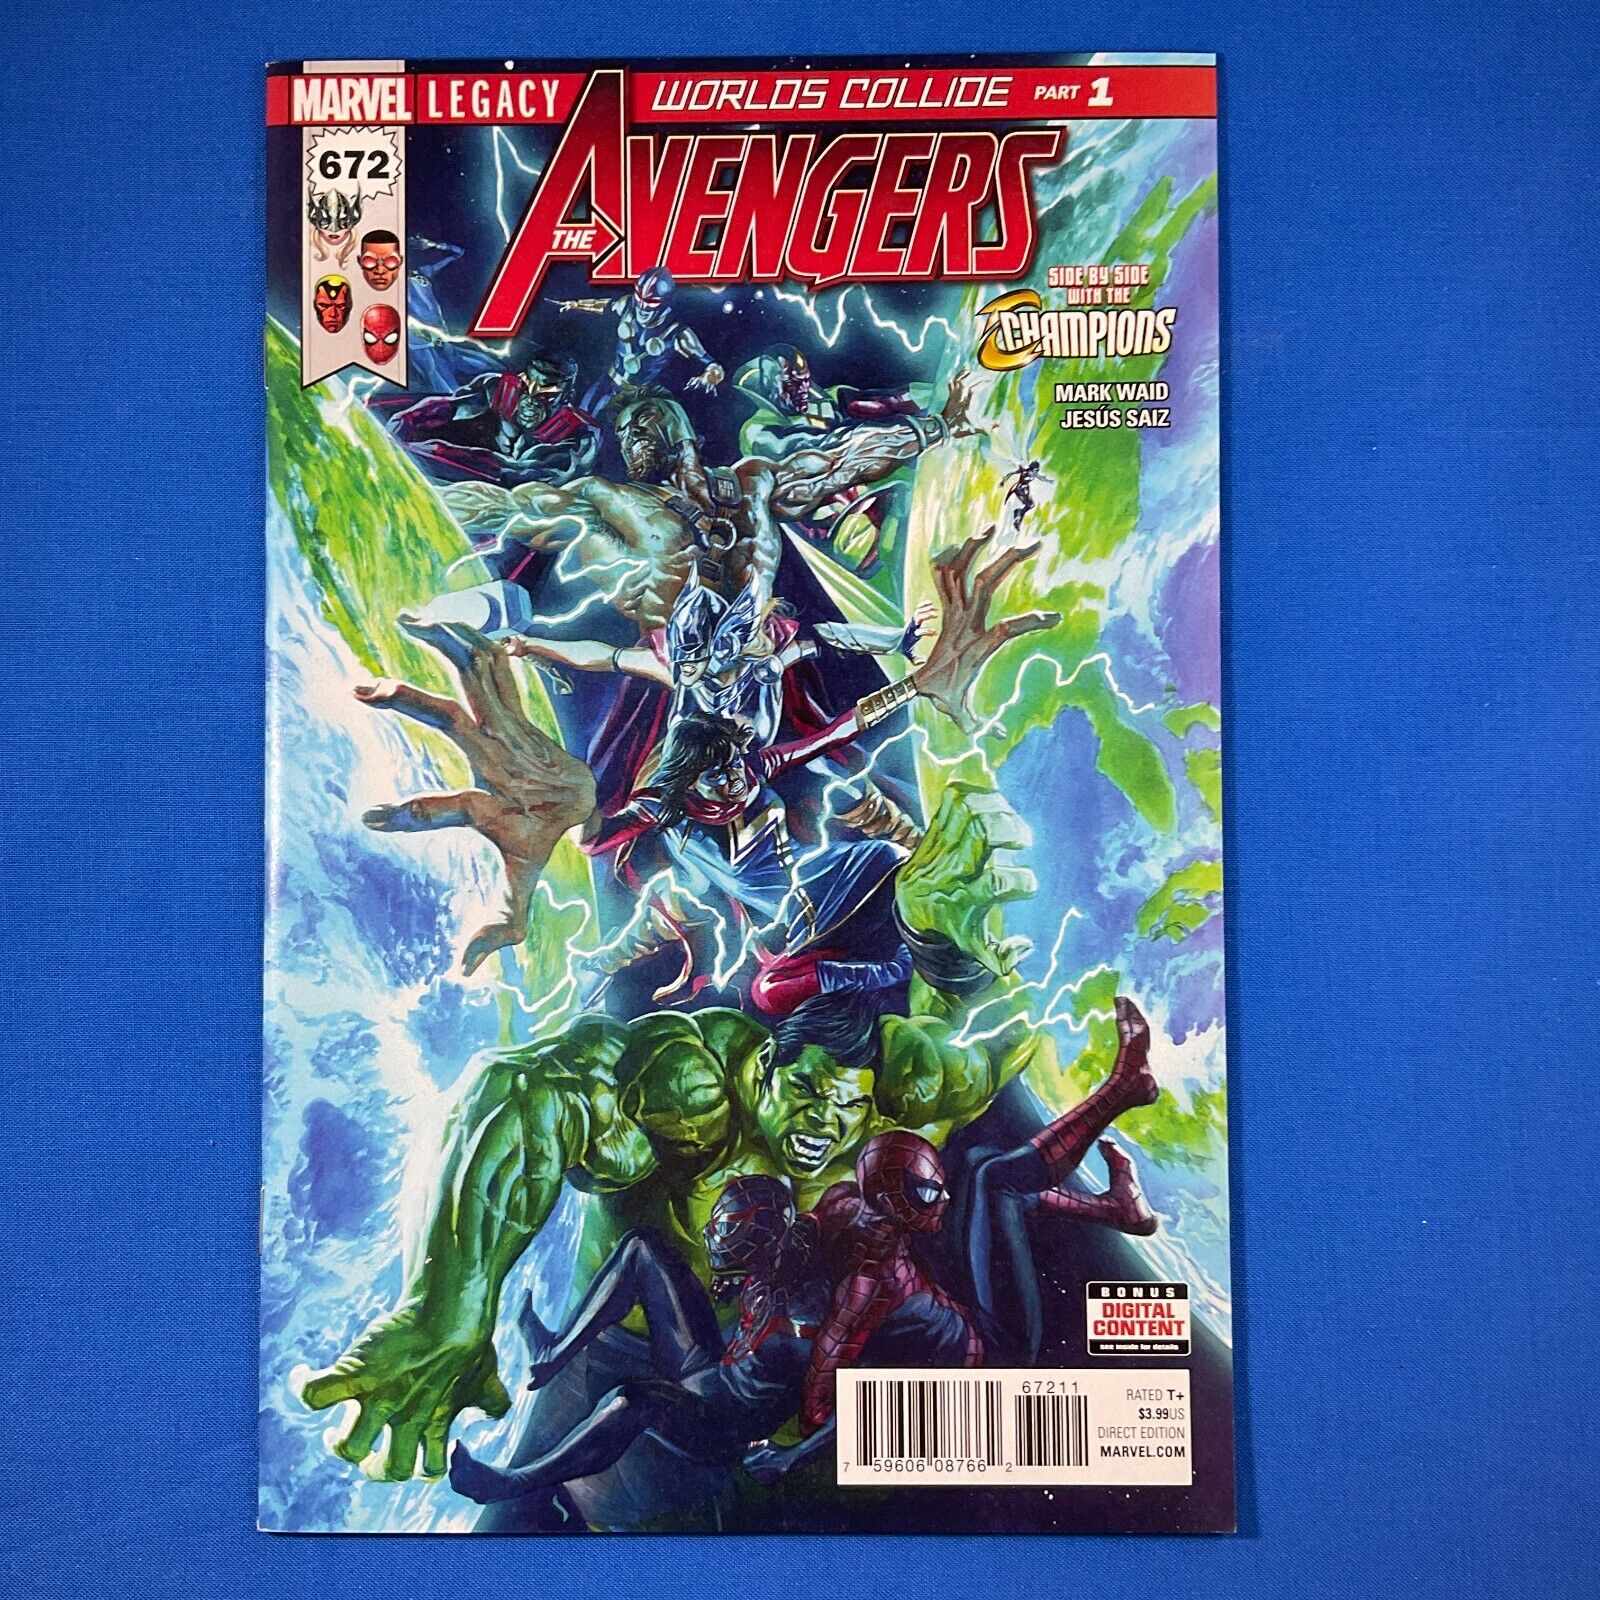 Avengers #672 Marvel Comics Legacy 2017 Worlds Collide Part 1 Cover A